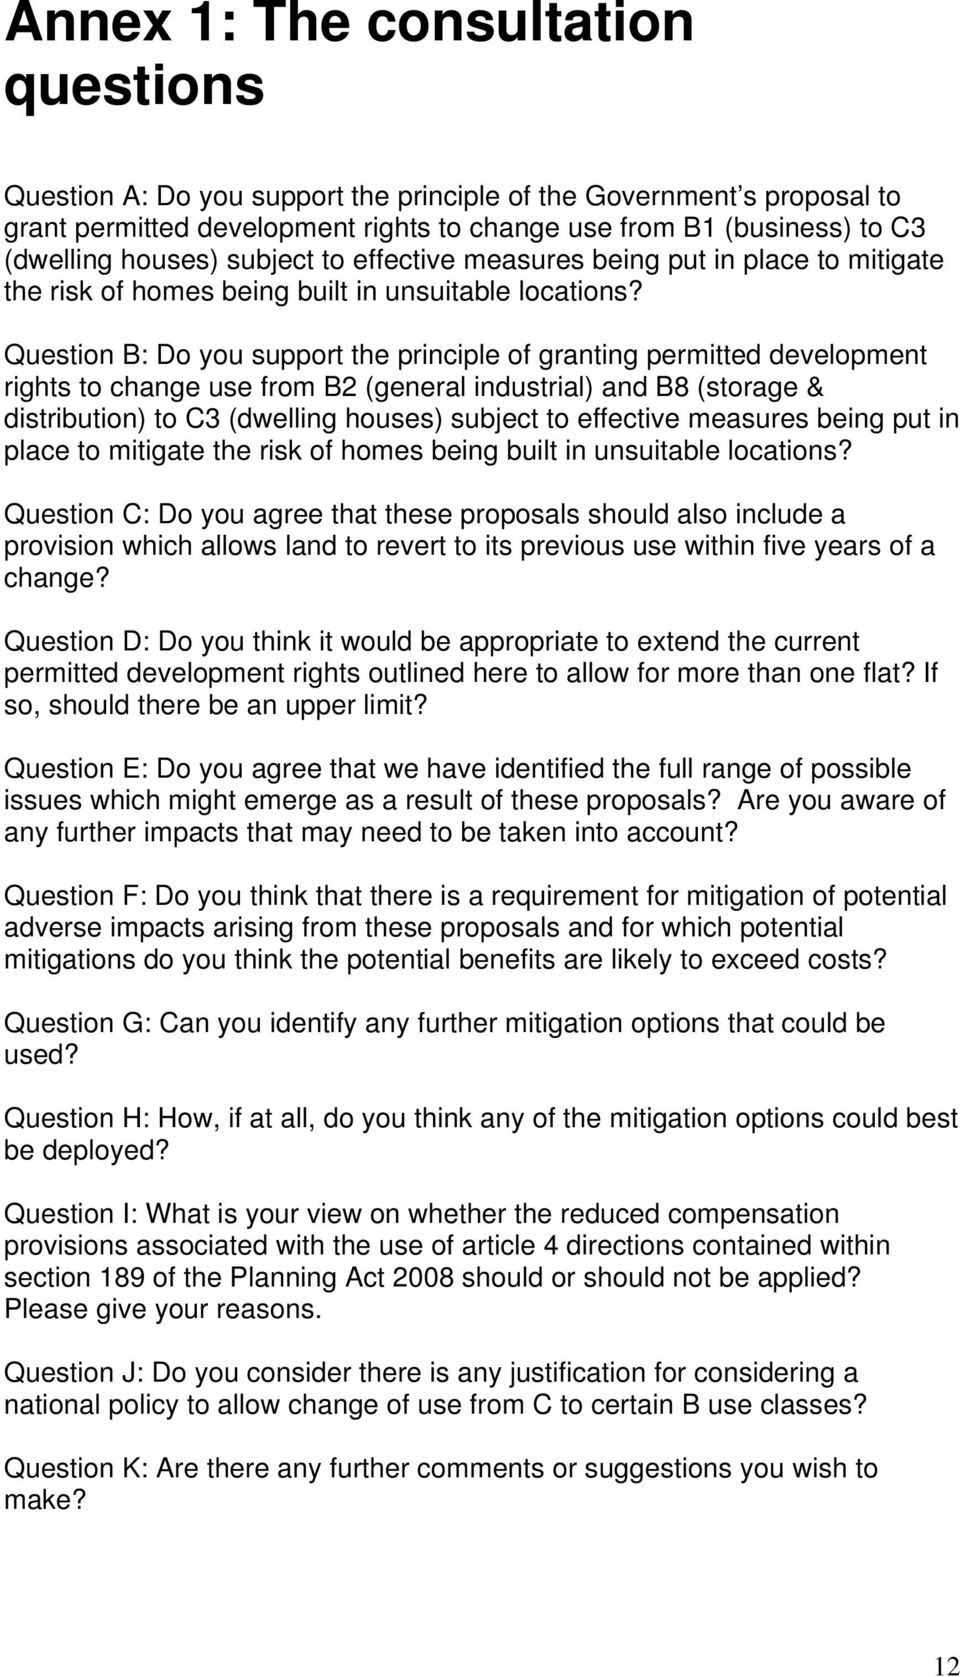 Question B: Do you support the principle of granting permitted development rights to change use from B2 (general industrial) and B8 (storage & distribution) to C3 (dwelling  Question C: Do you agree